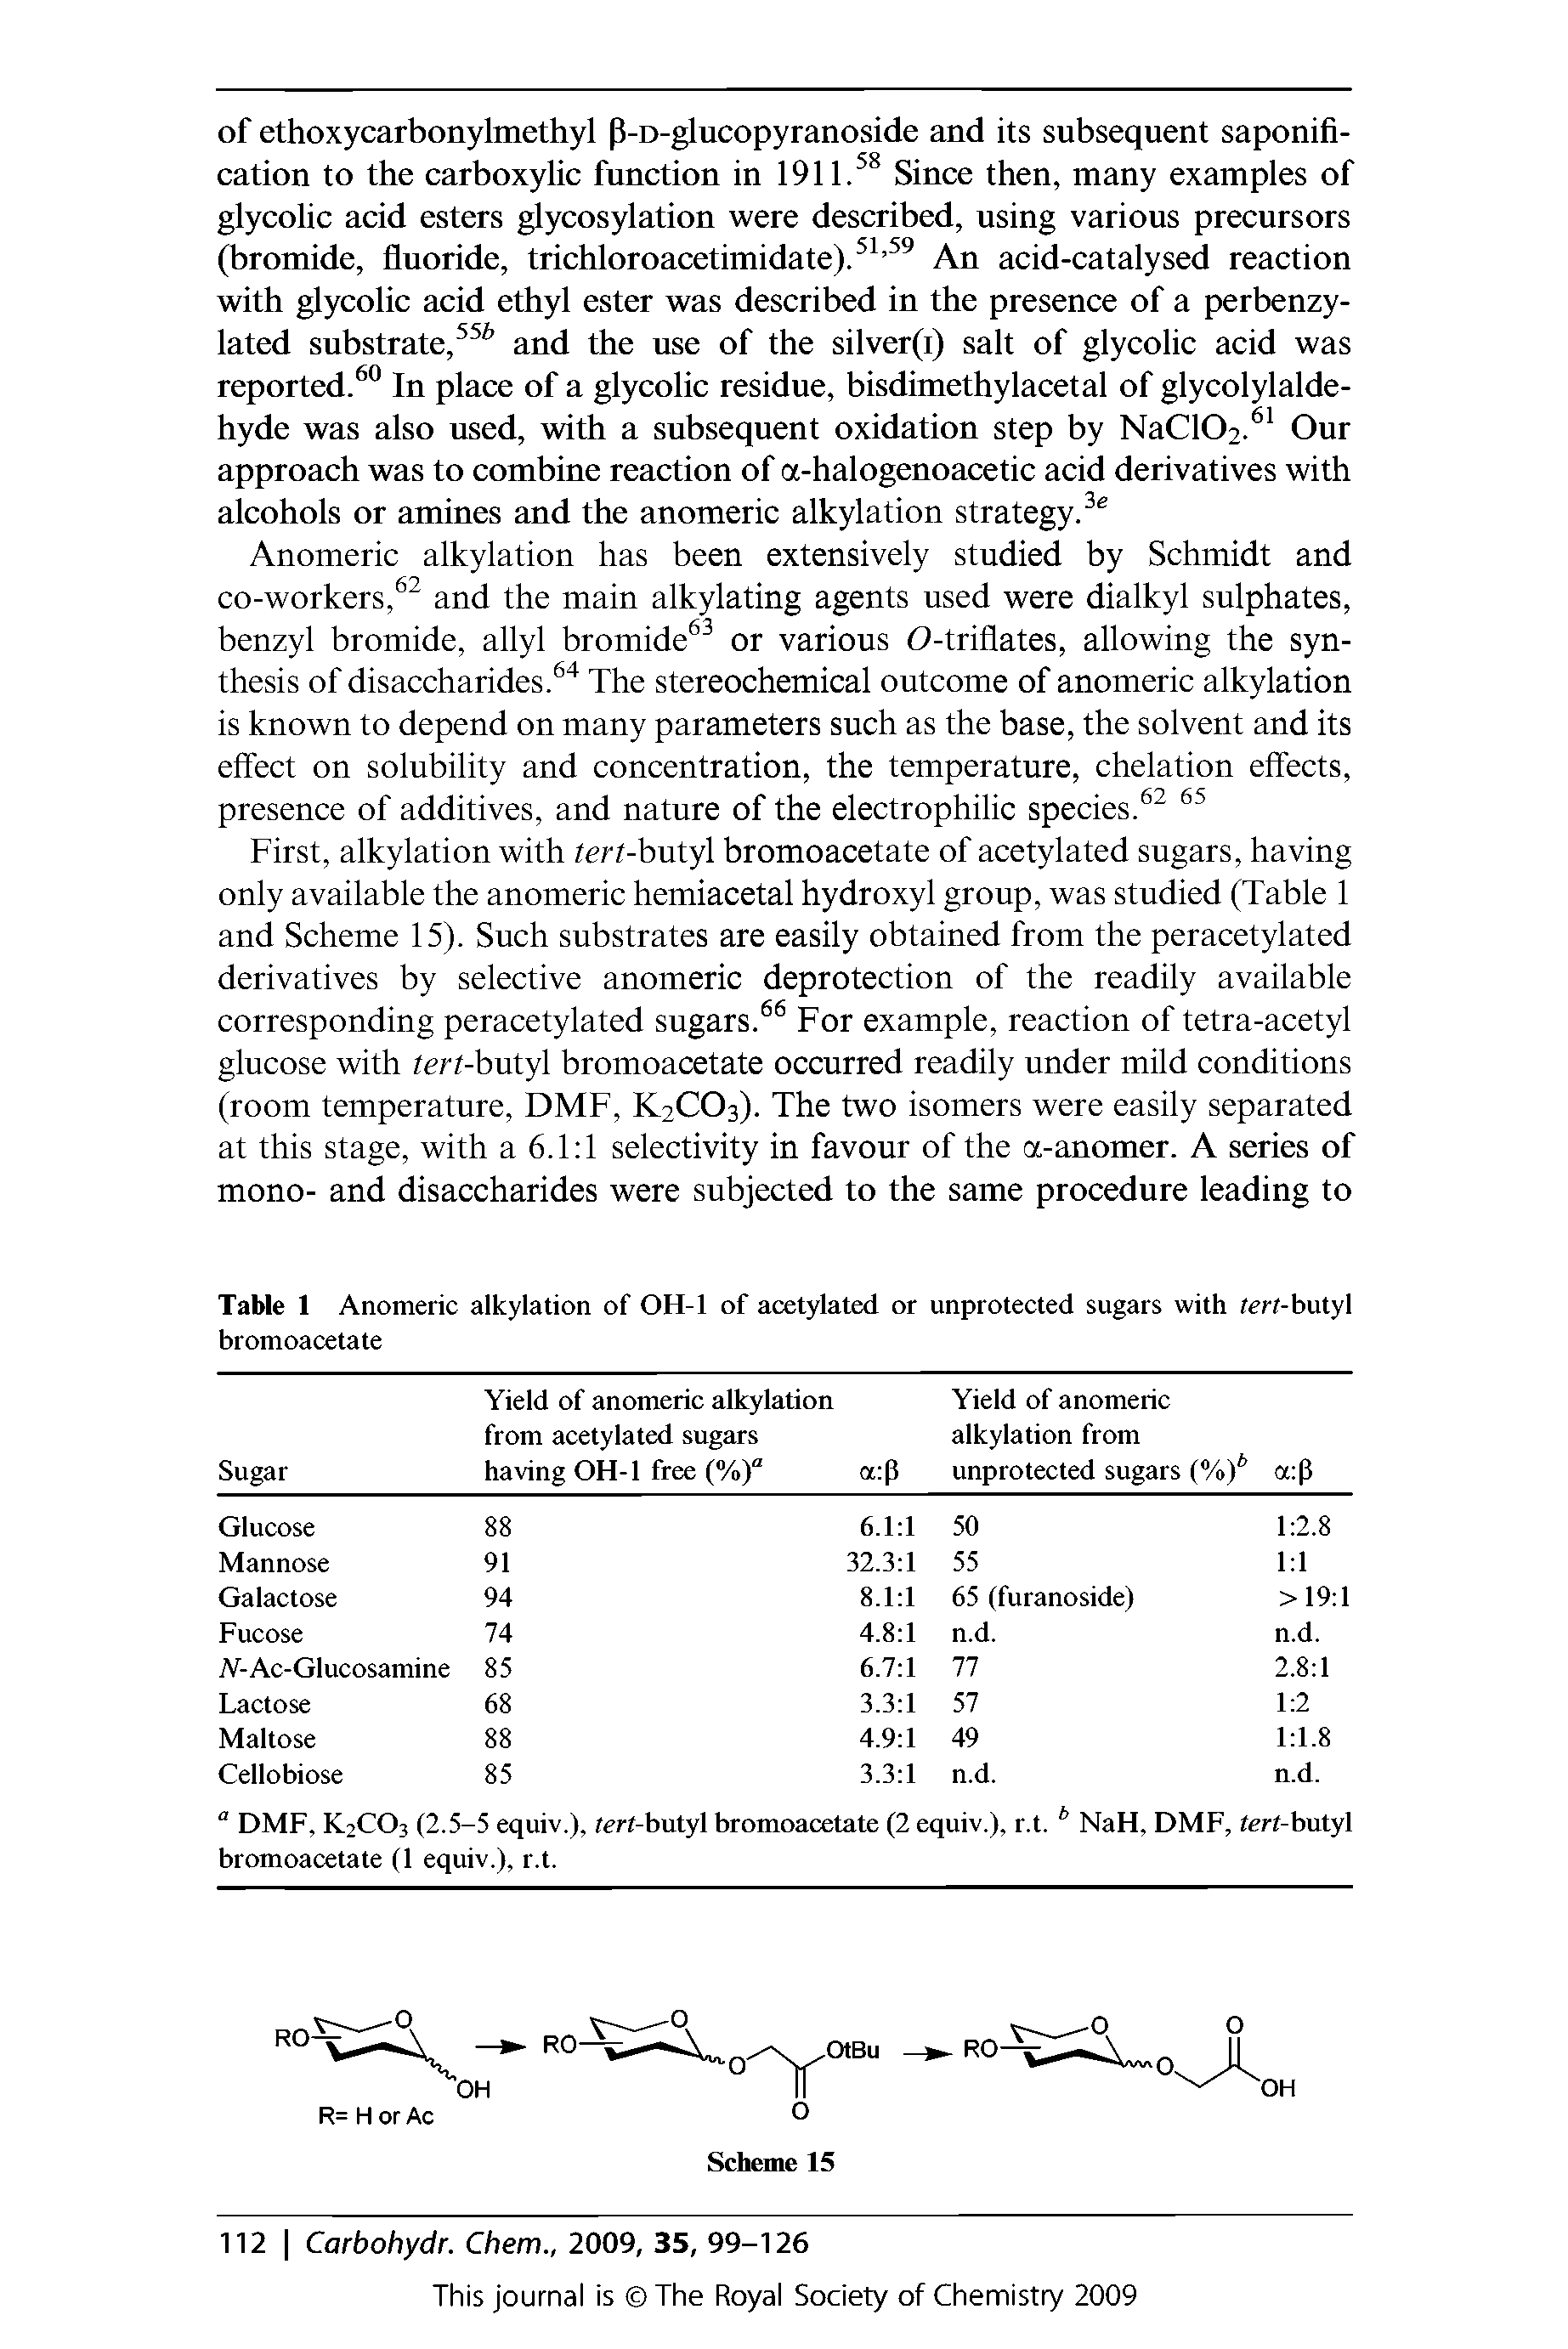 Table 1 Anomeric alkylation of OH-1 of acetylated or unprotected sugars with tert-butyl bromoacetate...